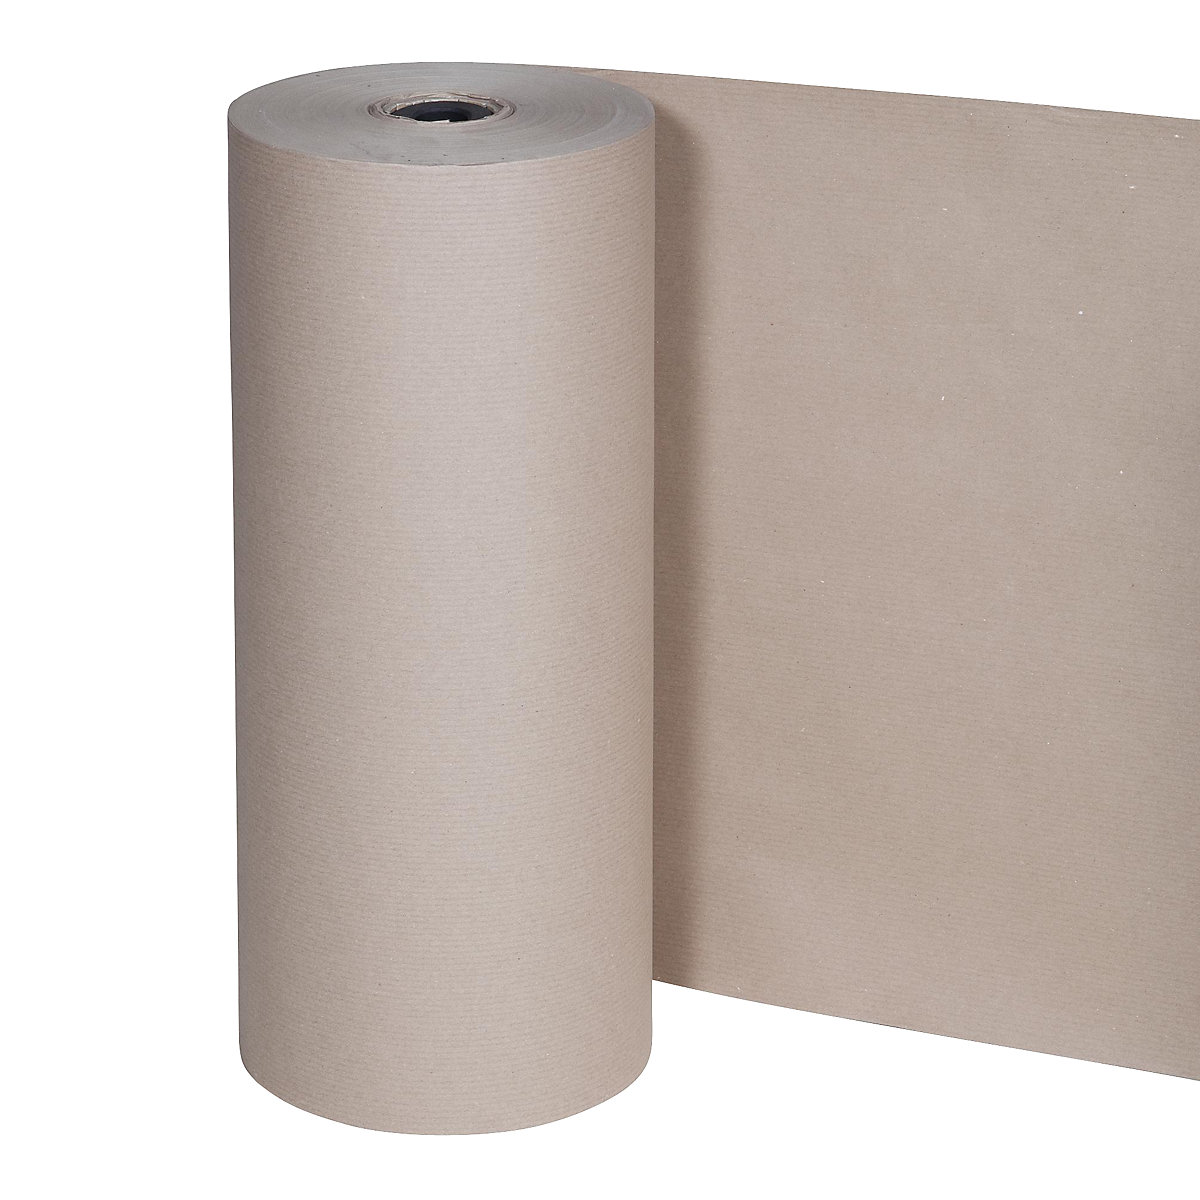 Packing paper, 80 g/m², Secare roll, 500 mm wide, pack of 2 rolls-2